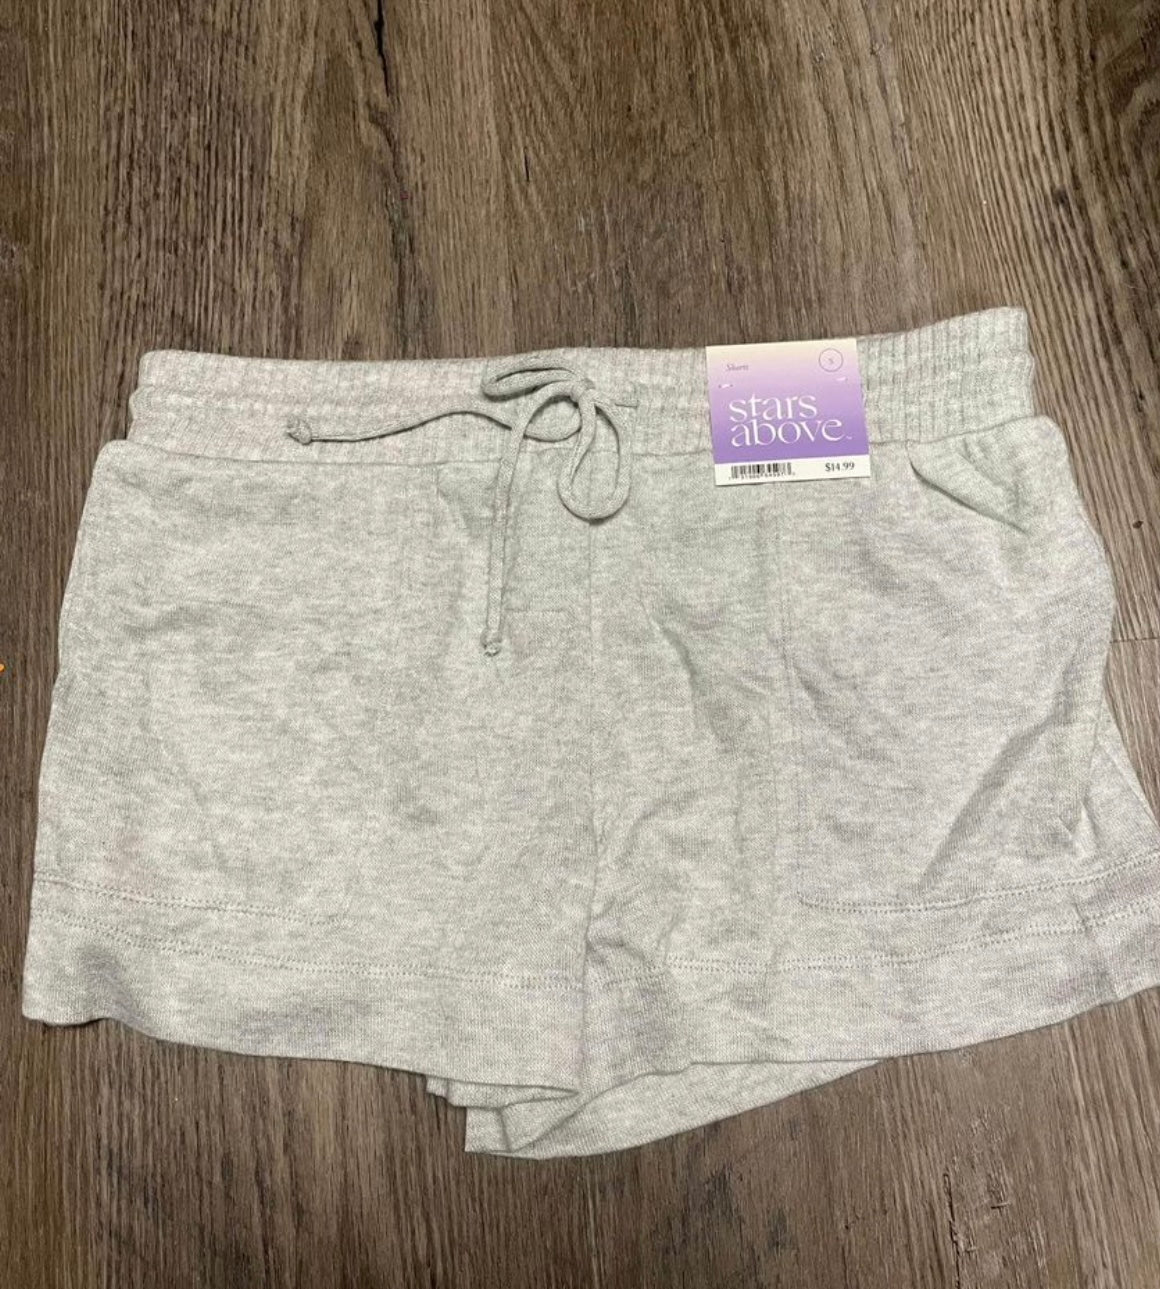 NEW women small shorts. gray. very soft and comfortable. Stars above